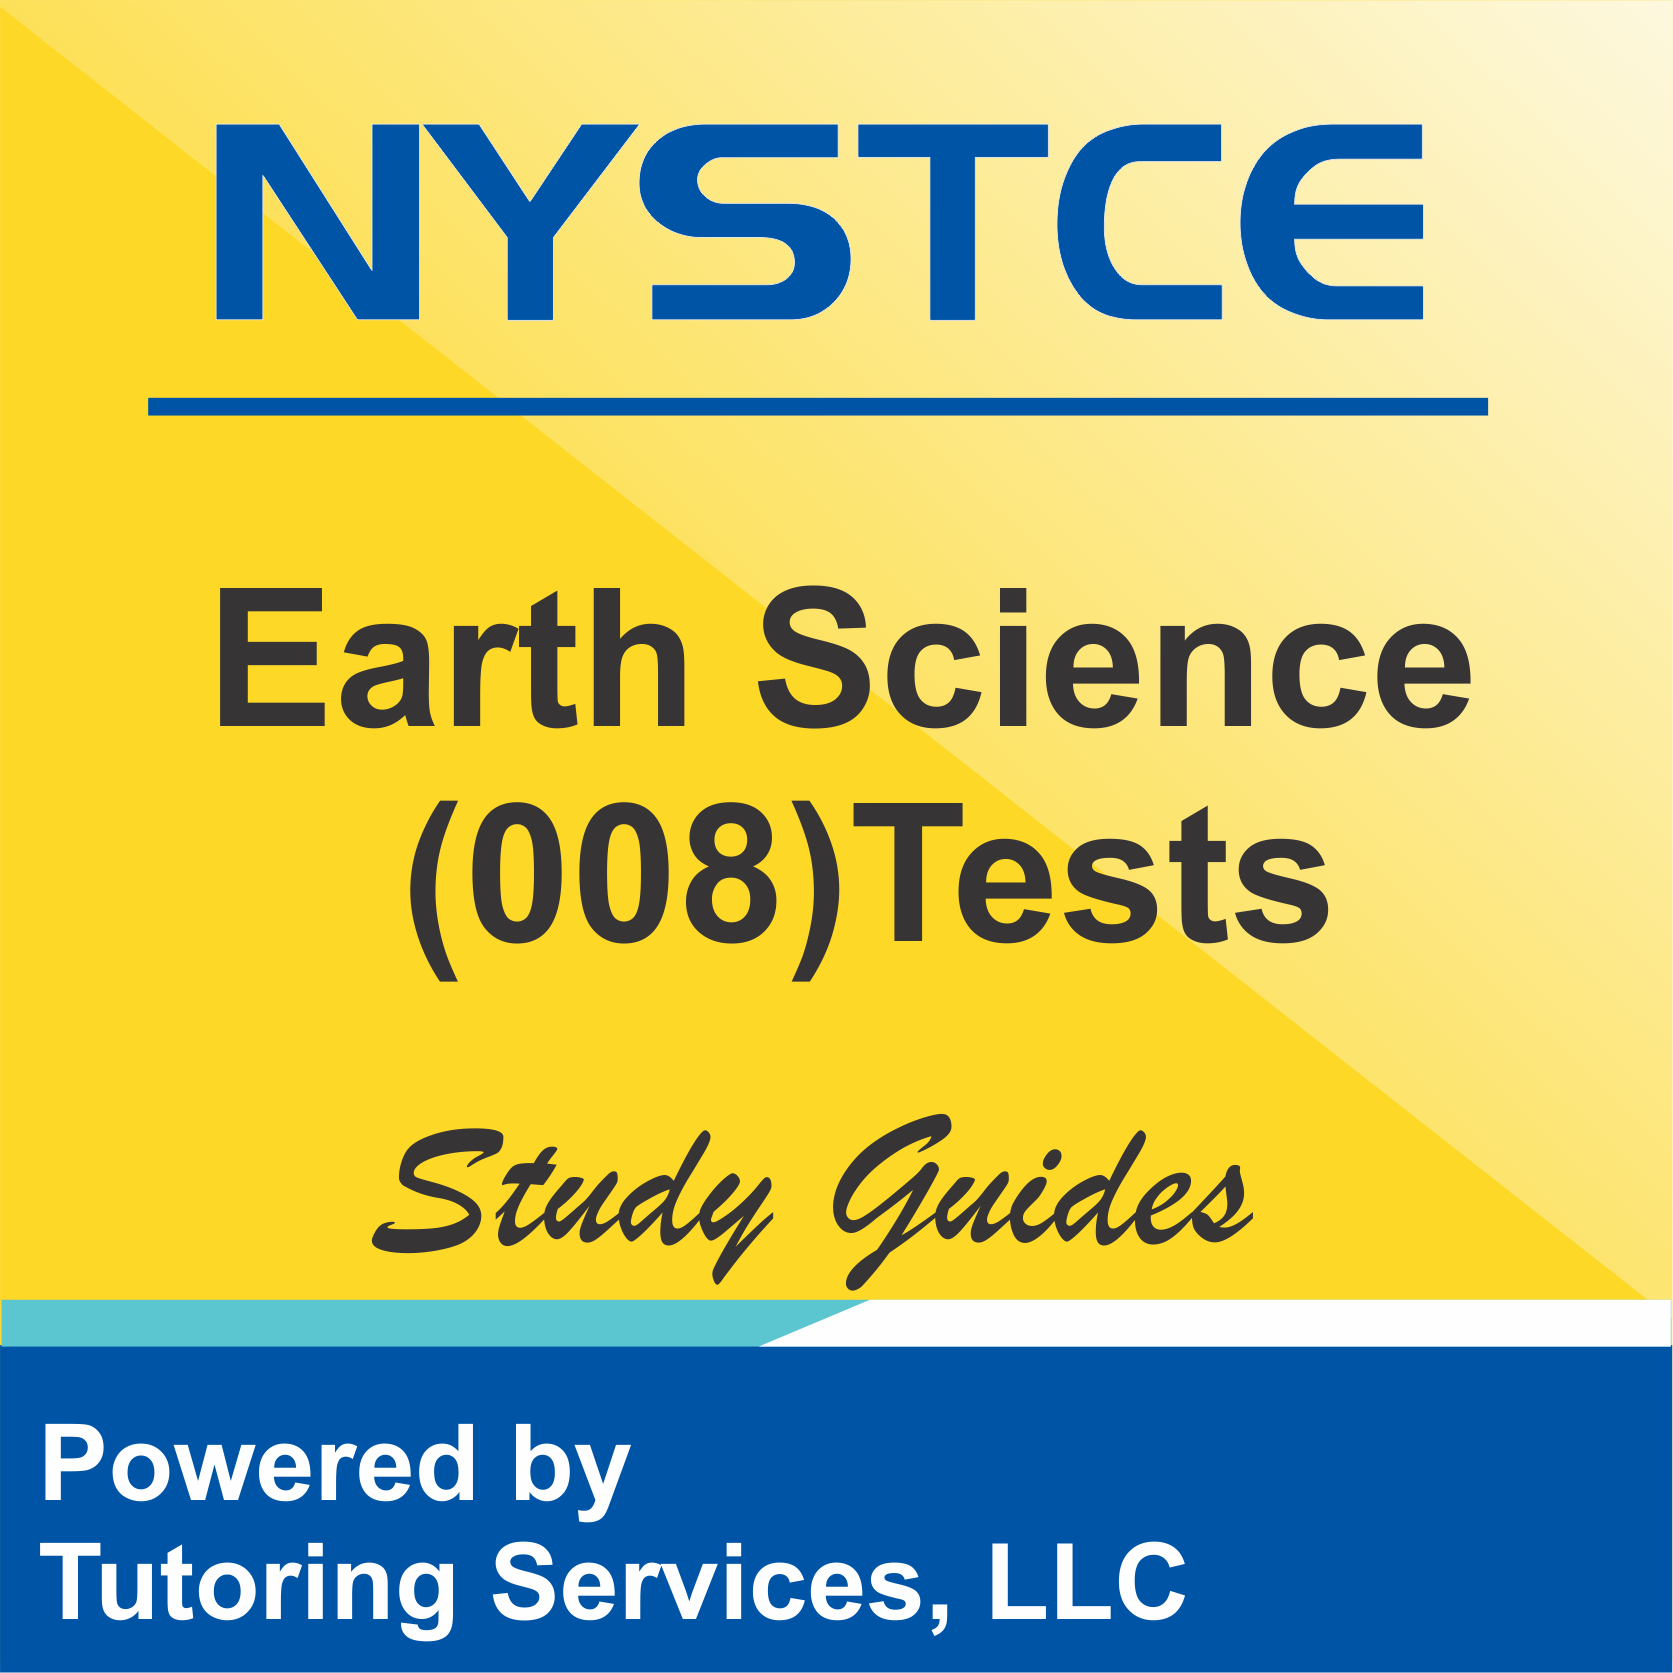 NYSTCE Teaching Certification Facts and Information for Earth Science 008